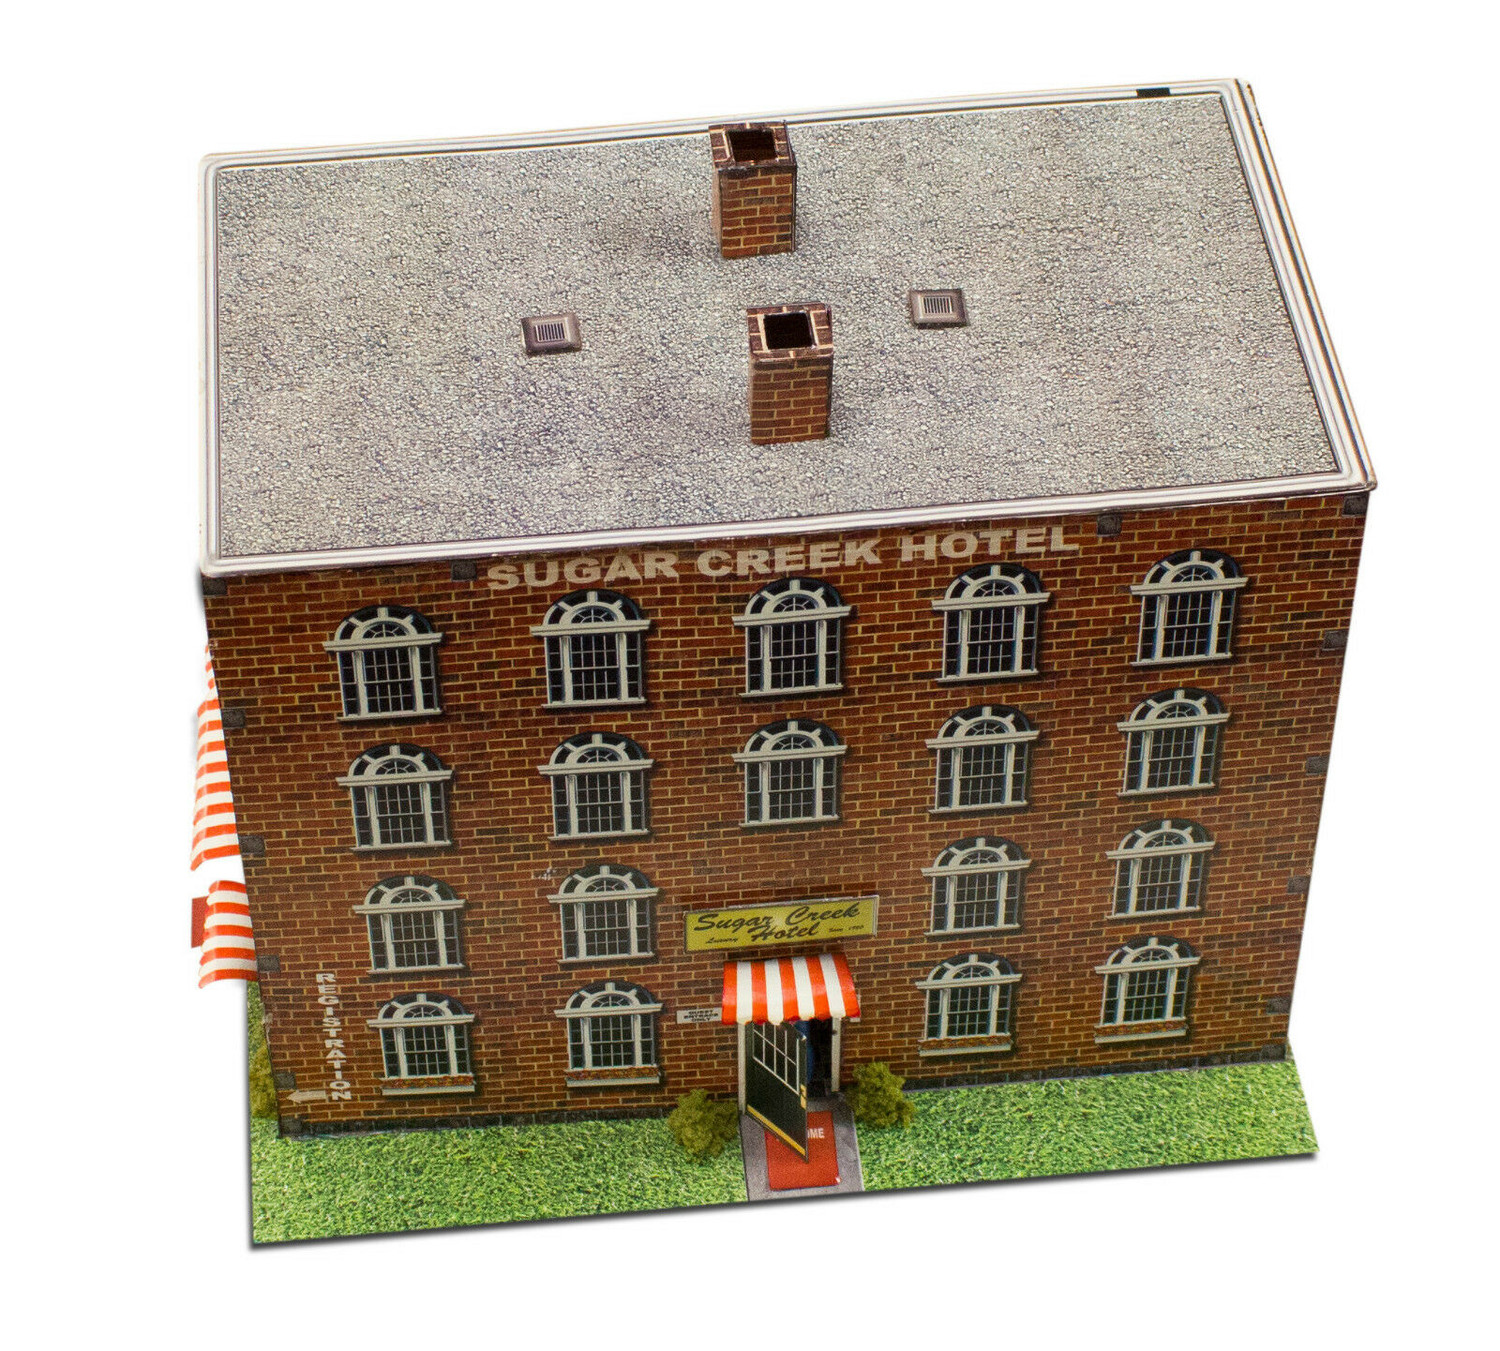 BK 6407 1:64 Scale "Hotel" Photo Real Scale Building Kit